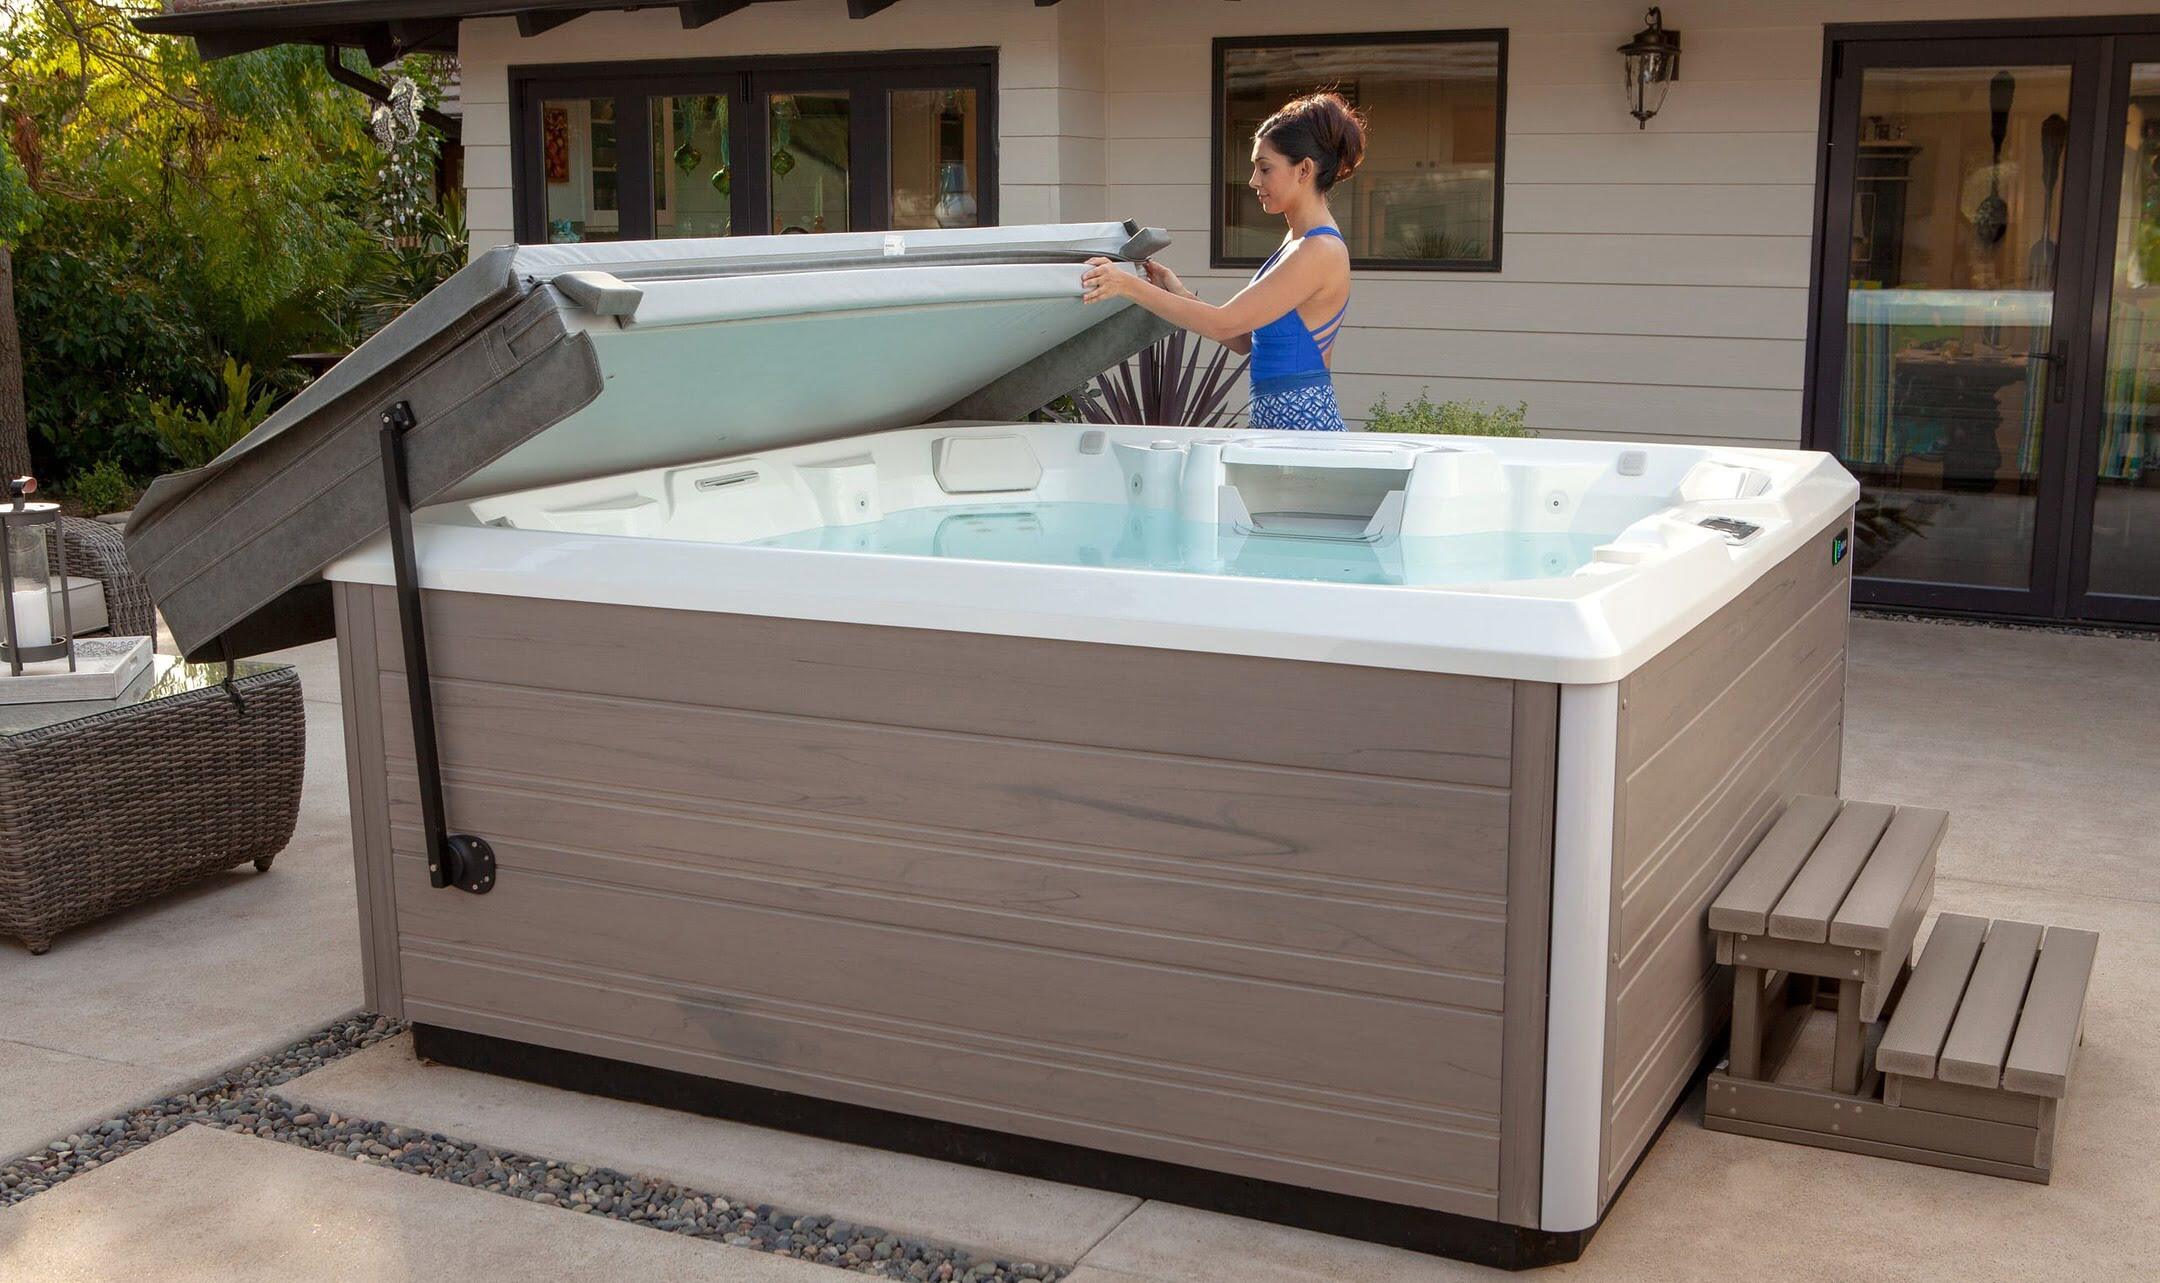 How To Use A Hot Tub Cover Lifter